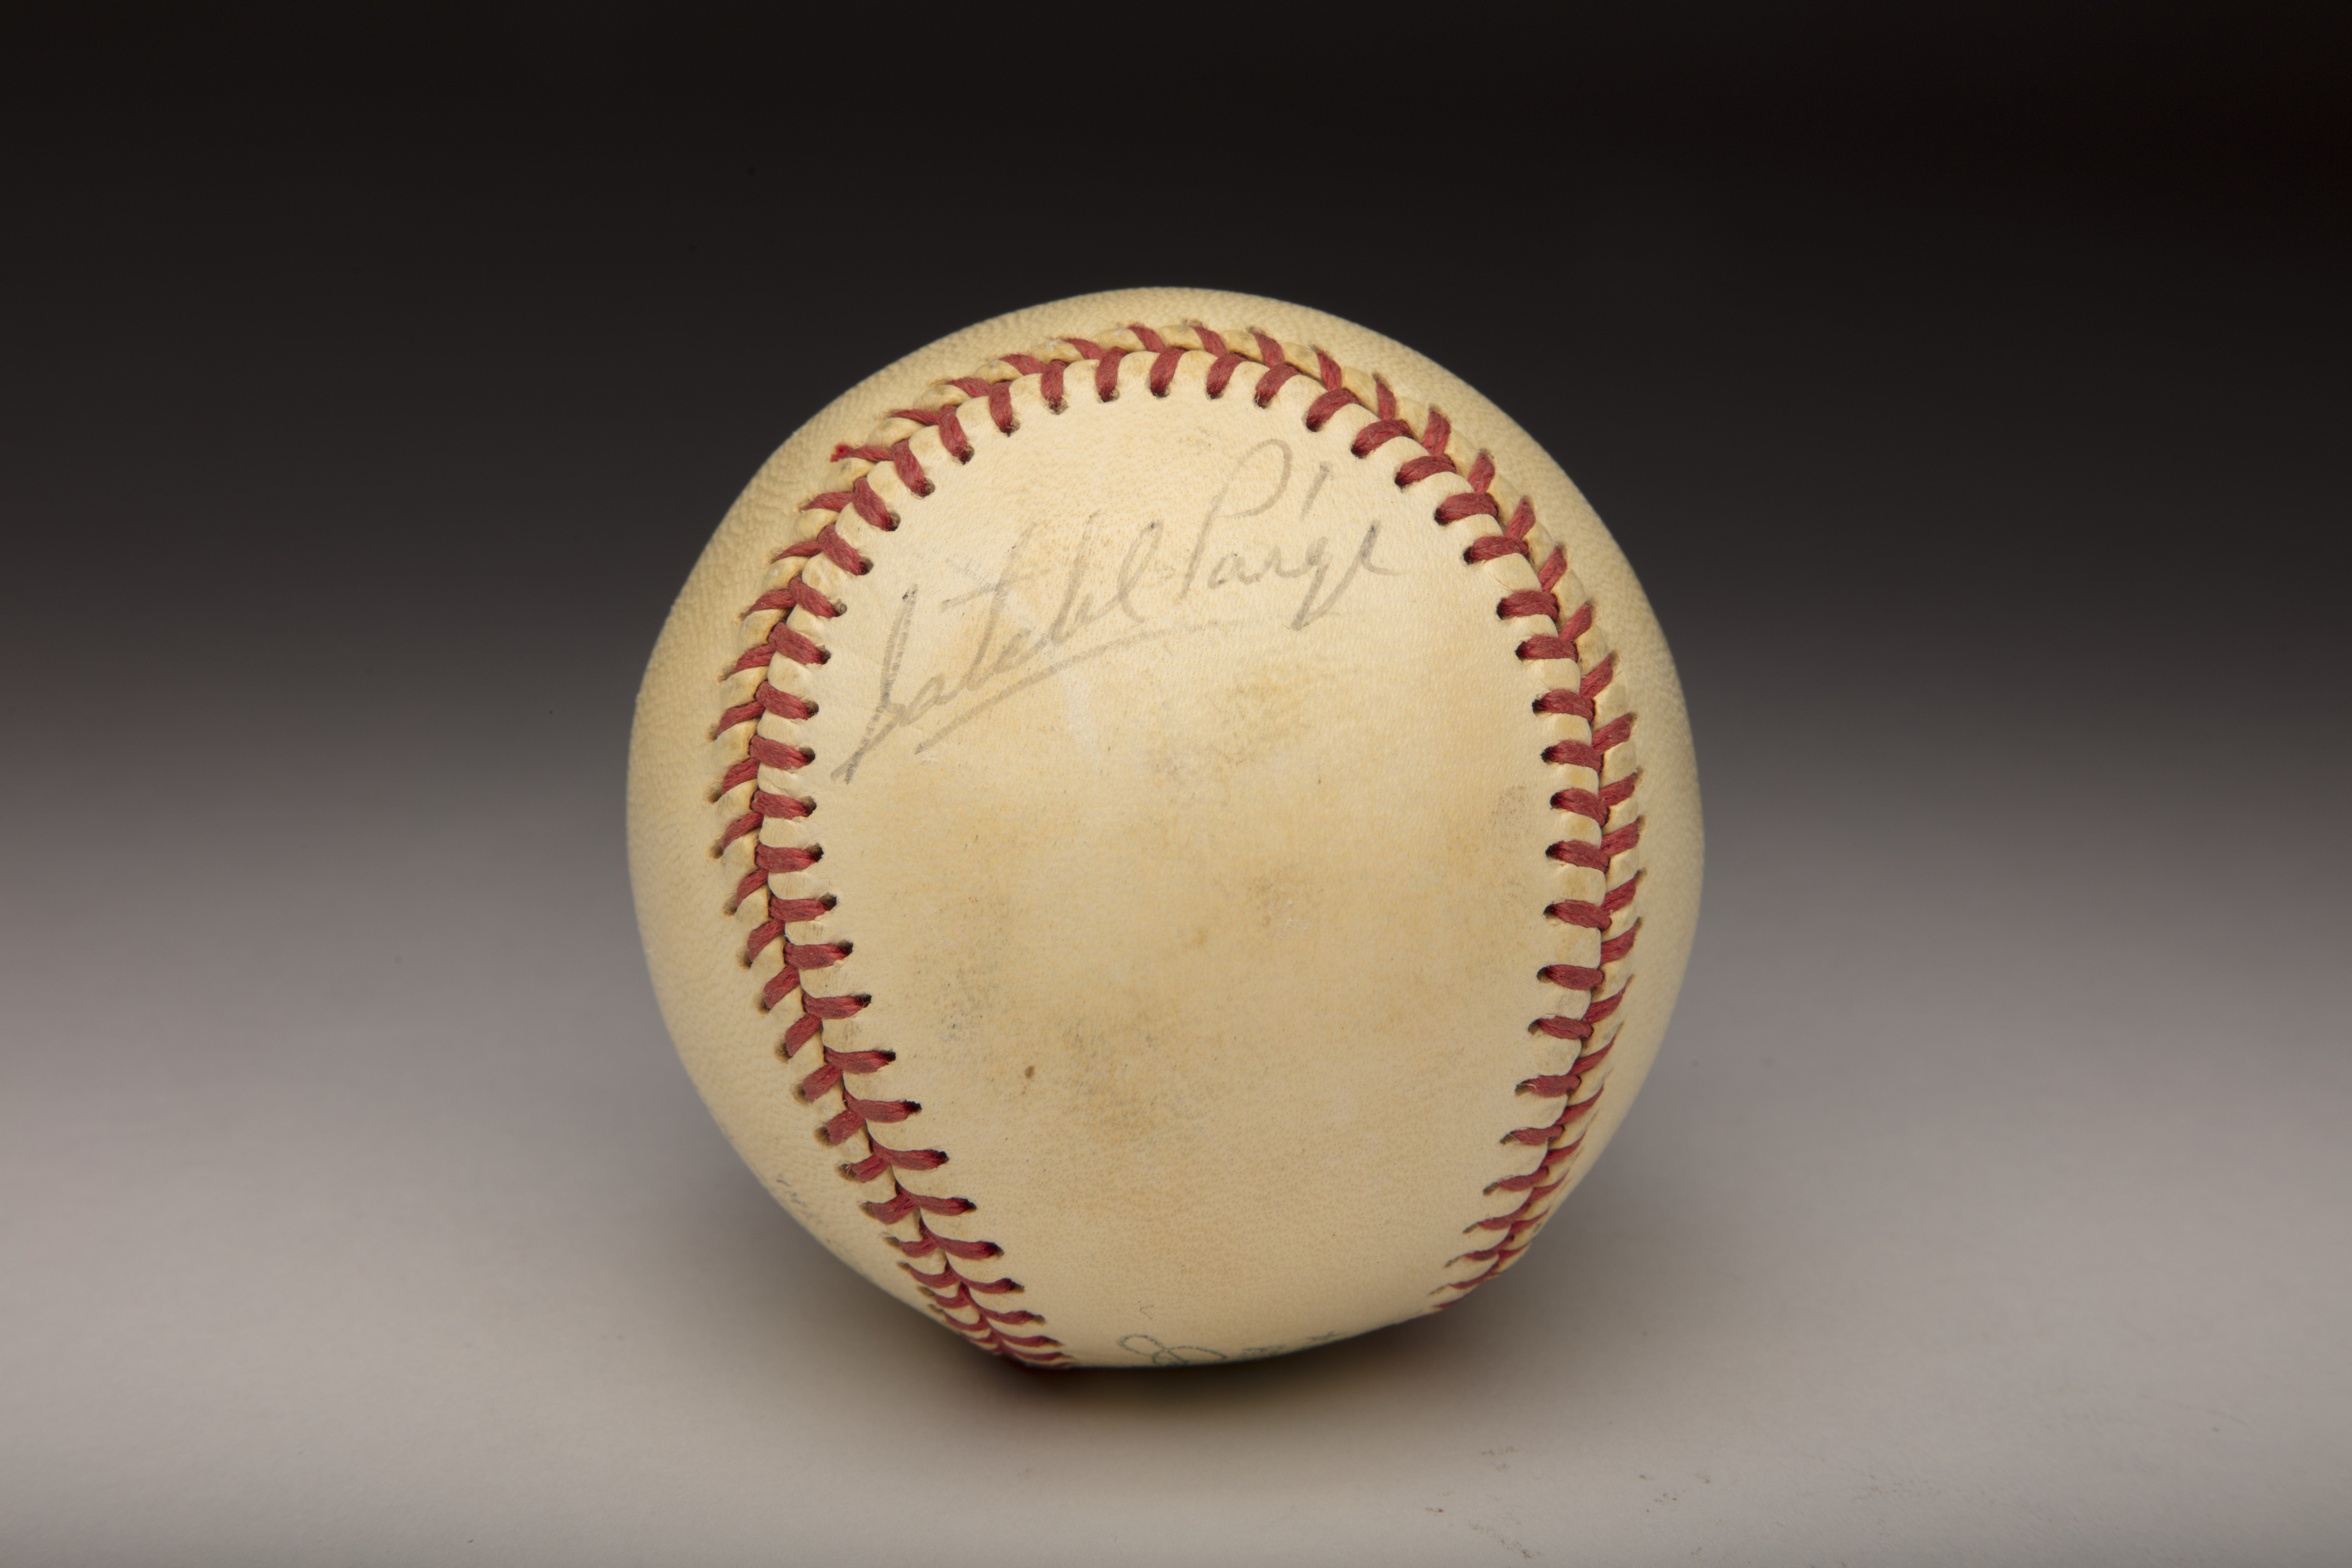 Satchel Paige – Society for American Baseball Research